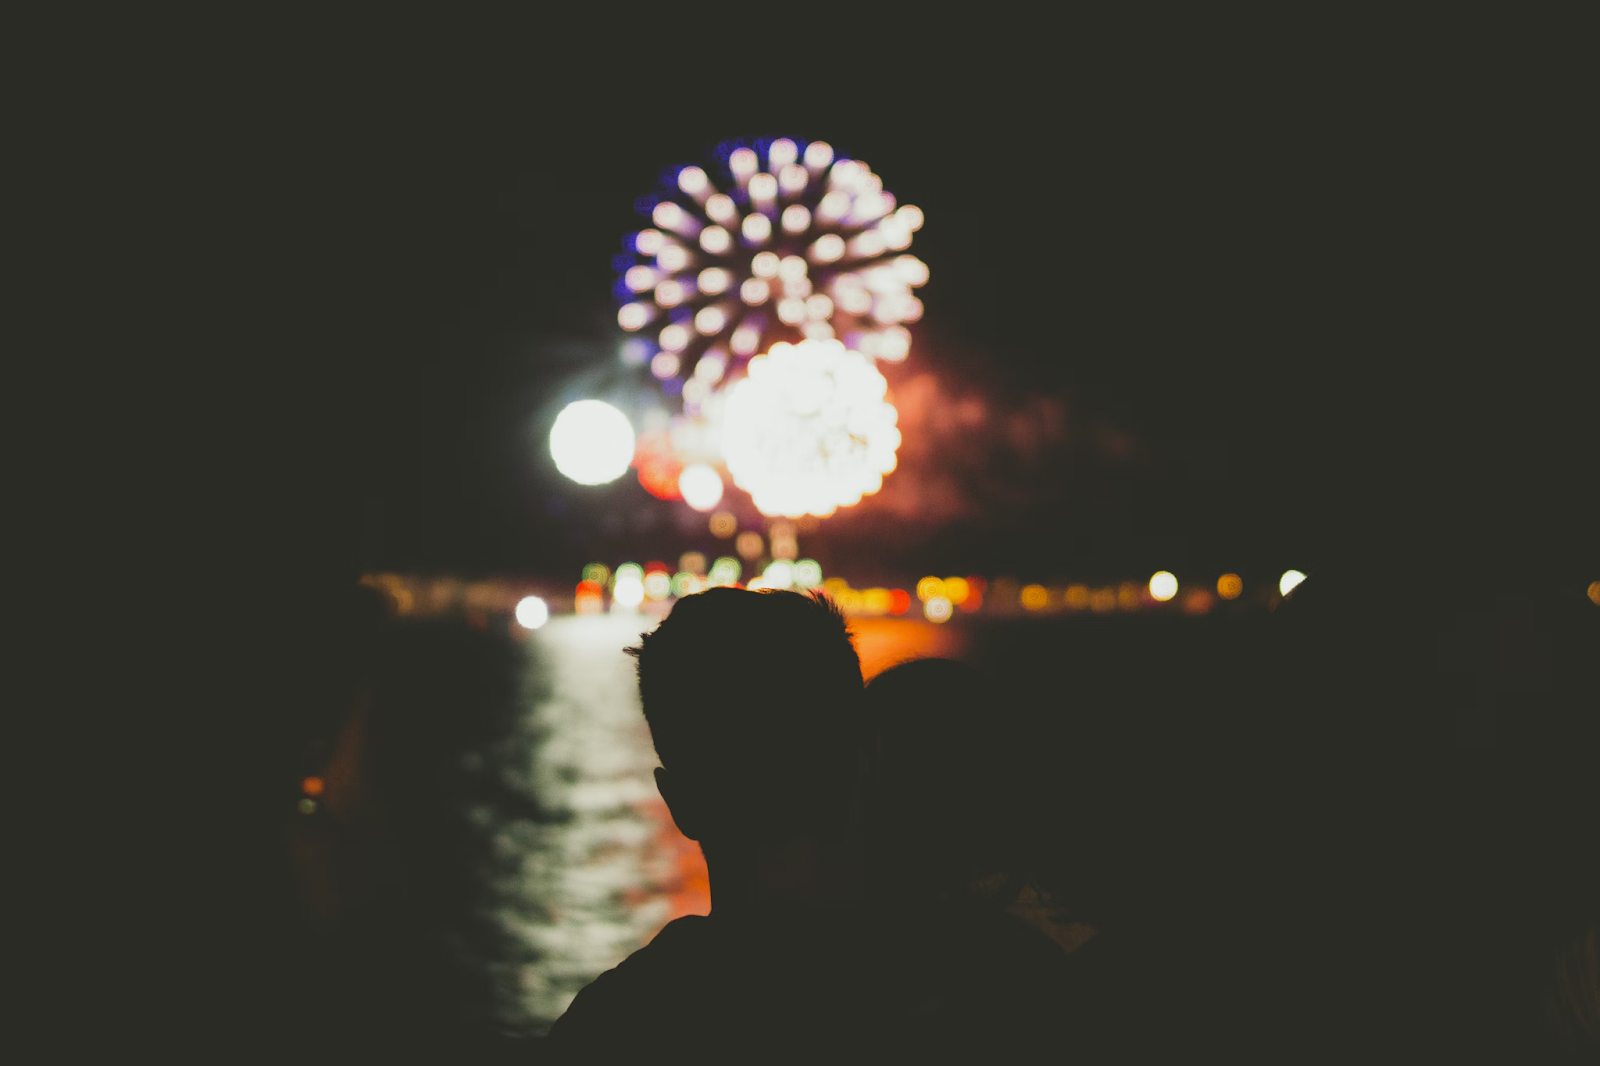 The silhouette of a man watching New Year's fireworks from a distance.